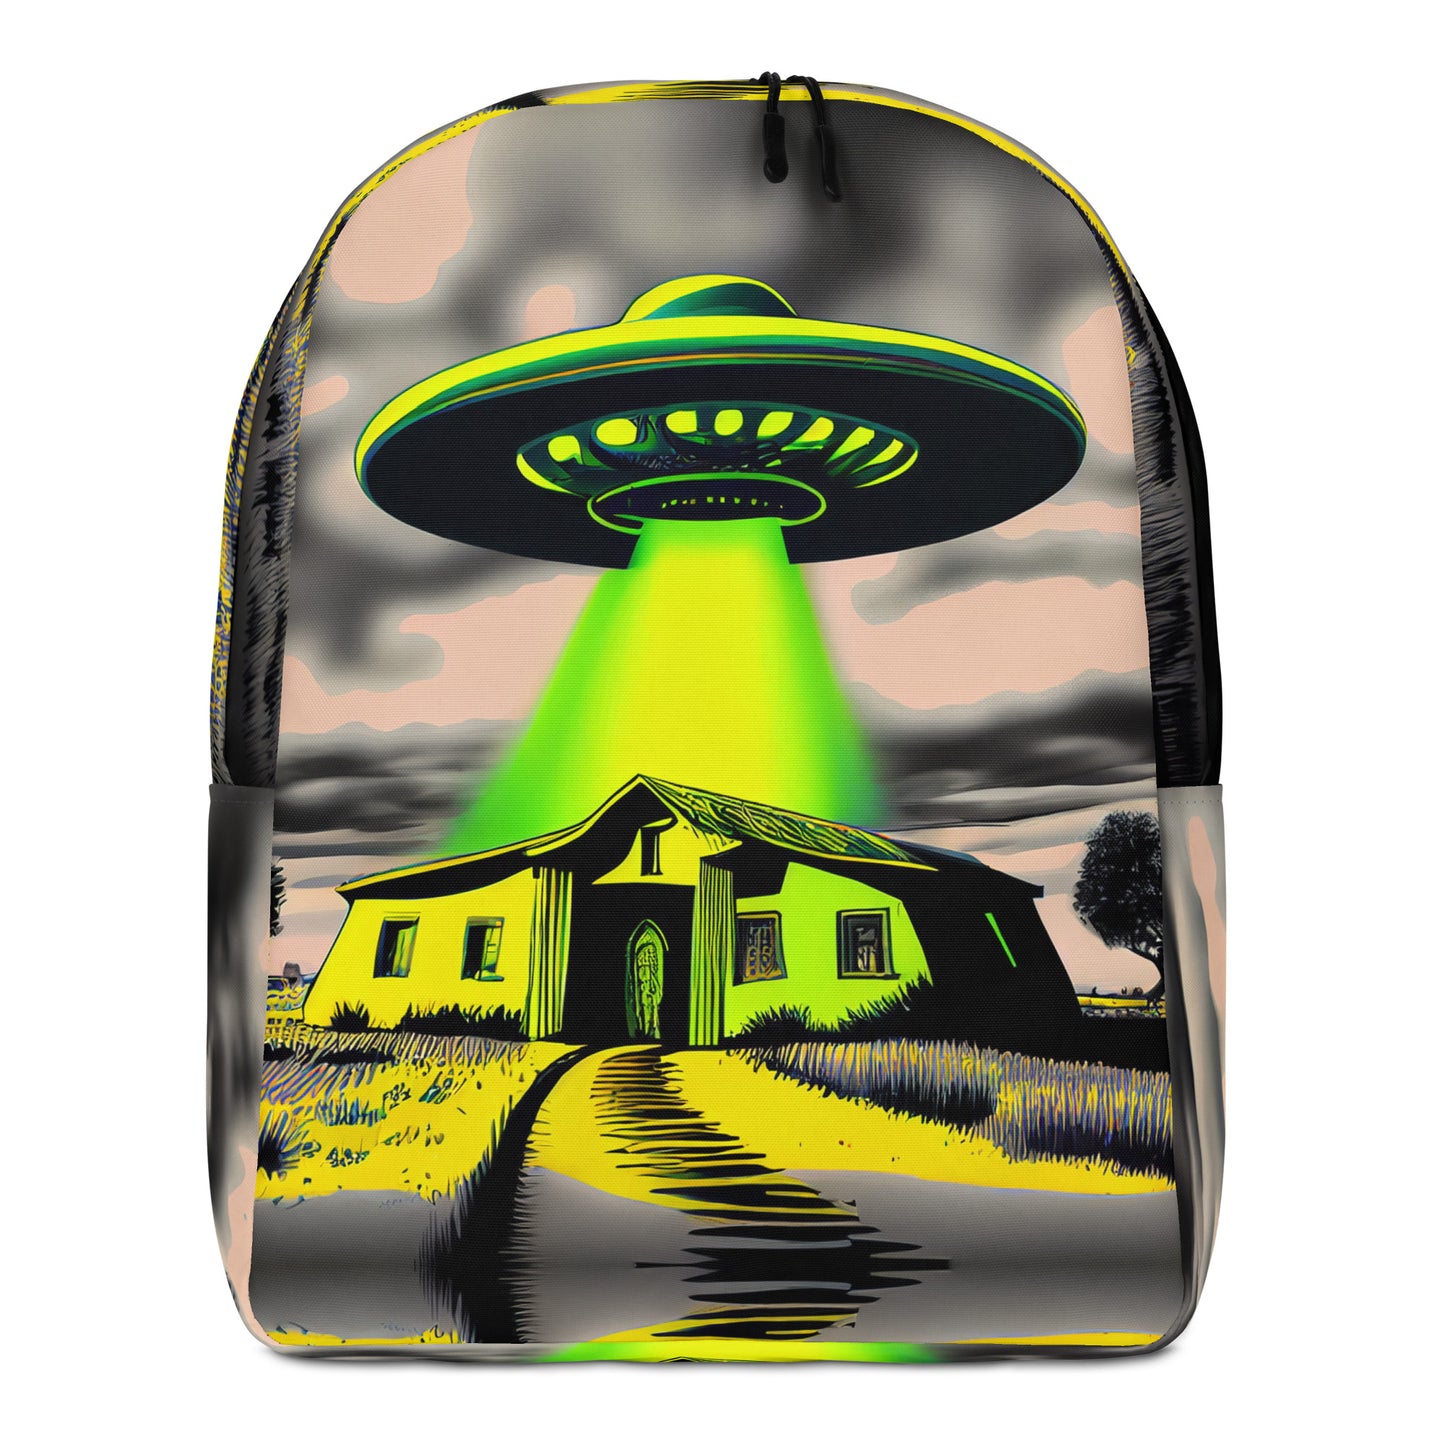 Liquid Sky d-vices / Ufo Academy Small Gearbag / Backpack